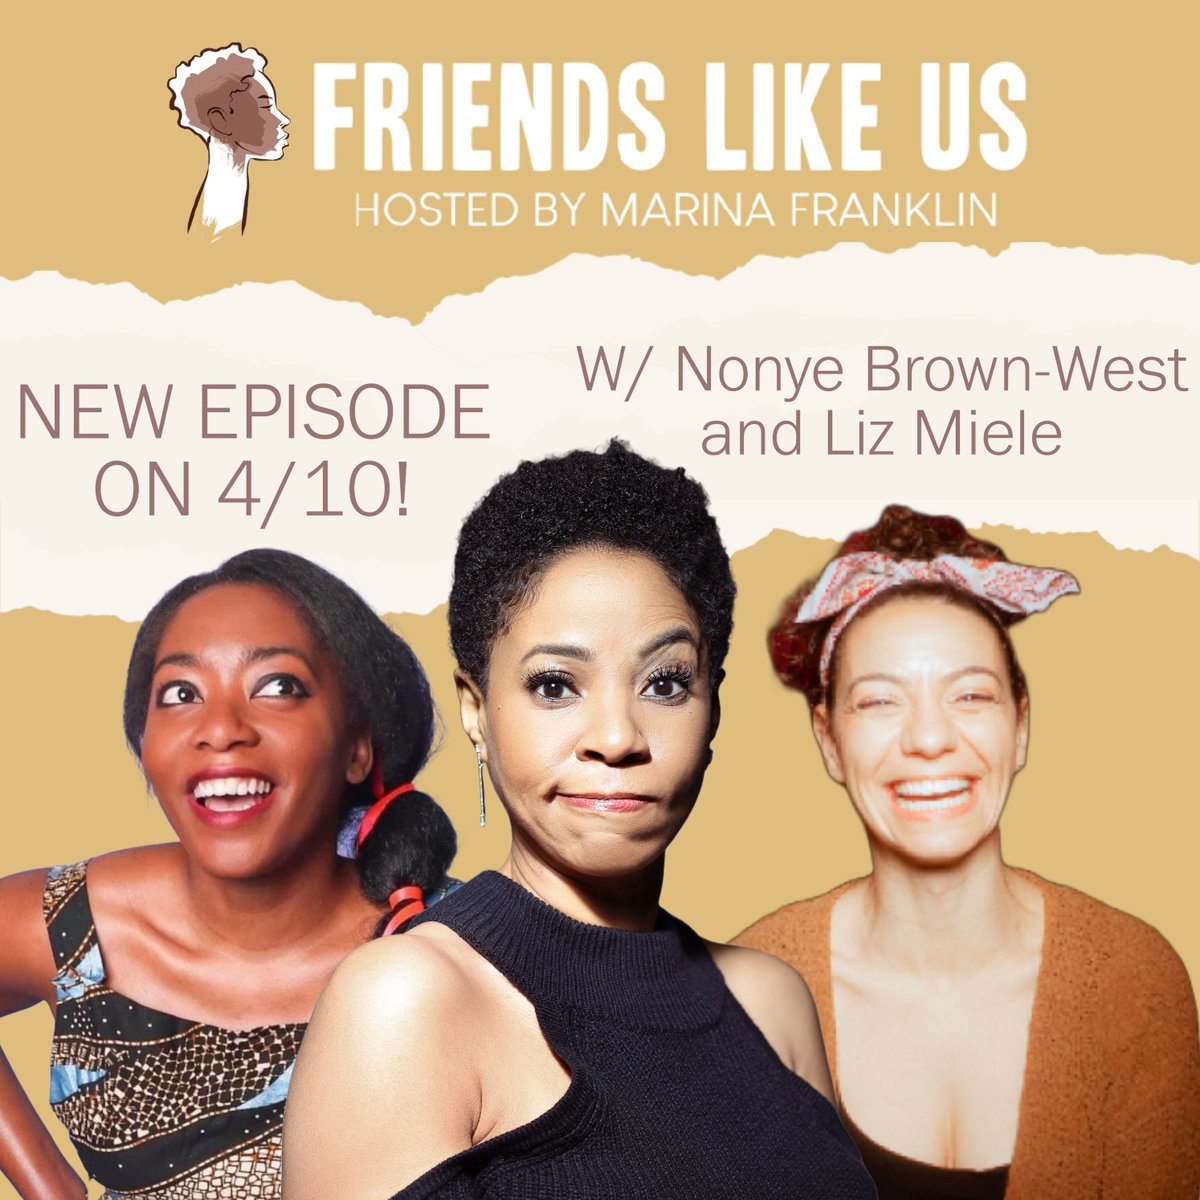 #NewEpisode tomorrow with special guests @ThatNonye @lizmiele and amazing host @marinayfranklin! Make sure to leave us five stars on #ApplePodcasts, #Stitcher, or #Spotify! #CheckUsOut and #subscribe here! ✨ ow.ly/q8Jk50KvRqM